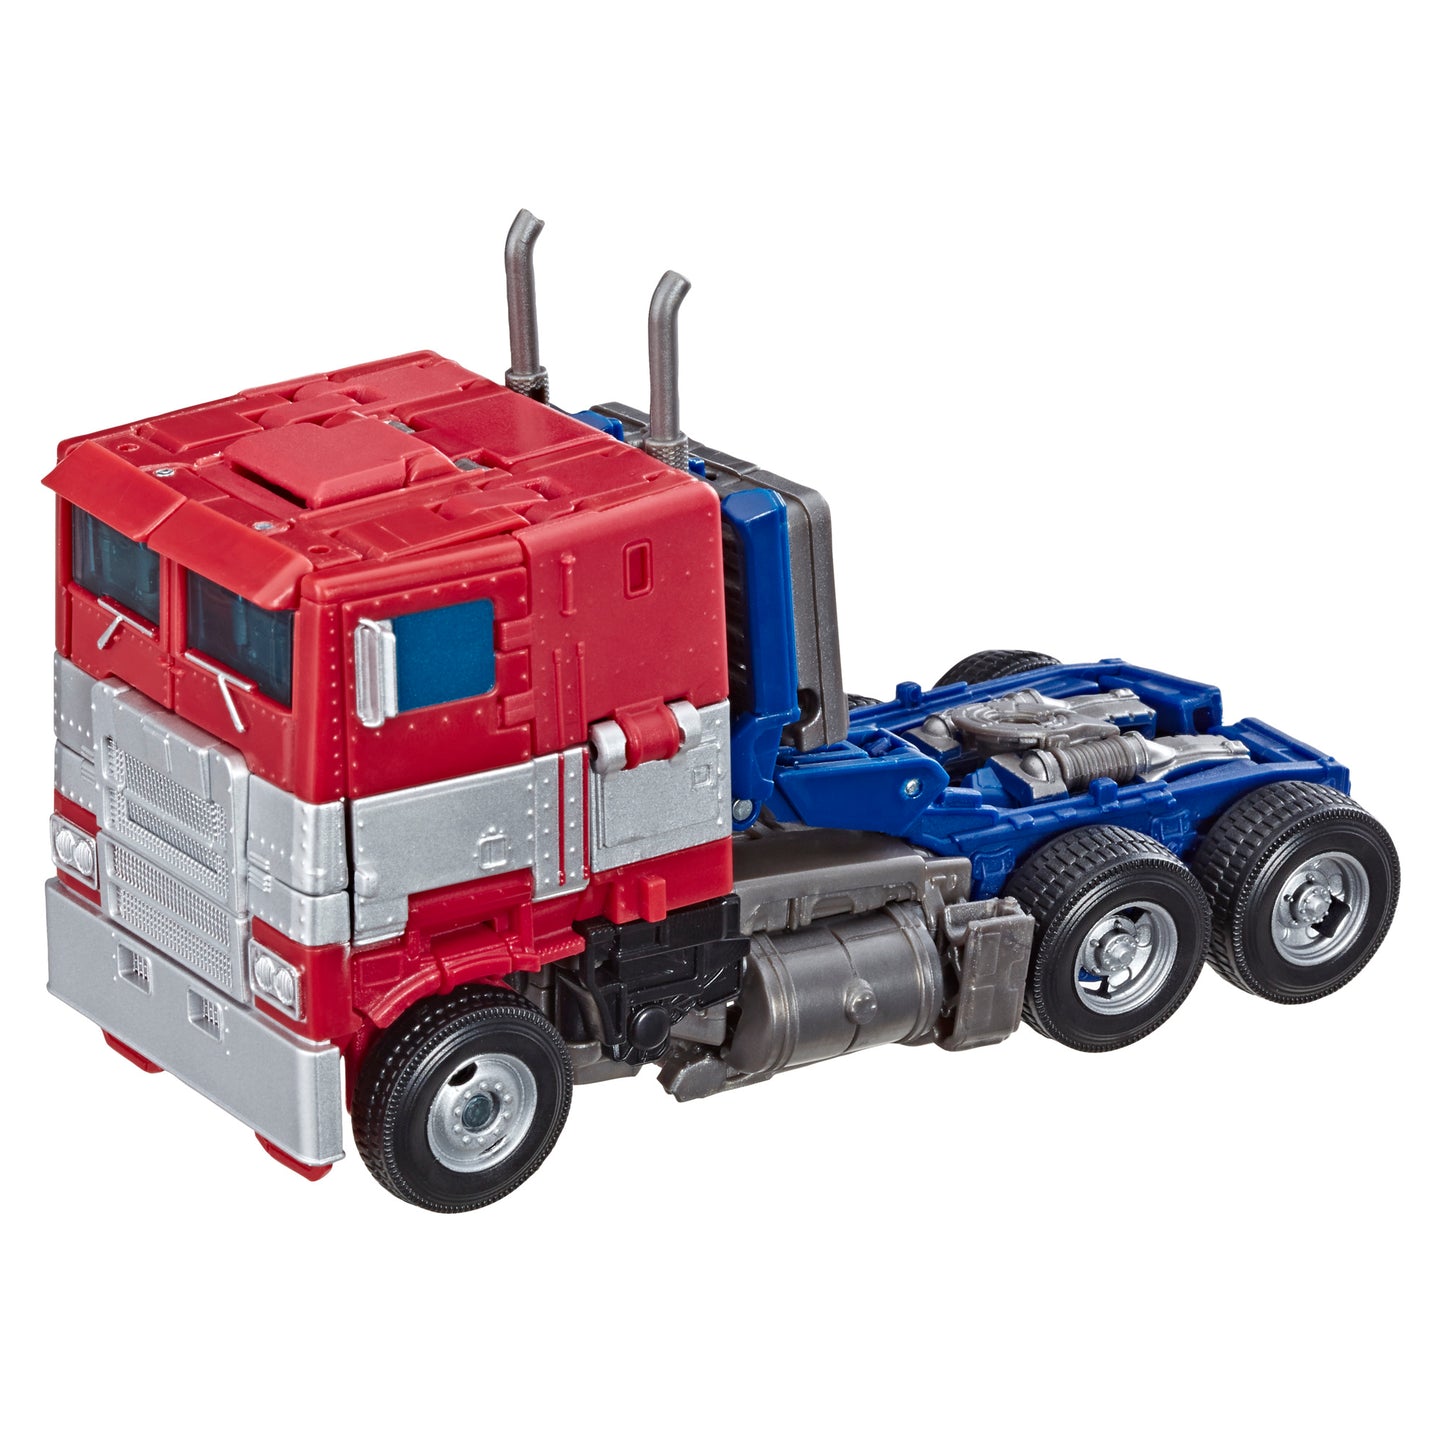 Transformers Toys Studio Series 38 Voyager Class Transformers: Bumblebee movie Optimus Prime Action Figure - Ages 8 and Up, 6.5-inch